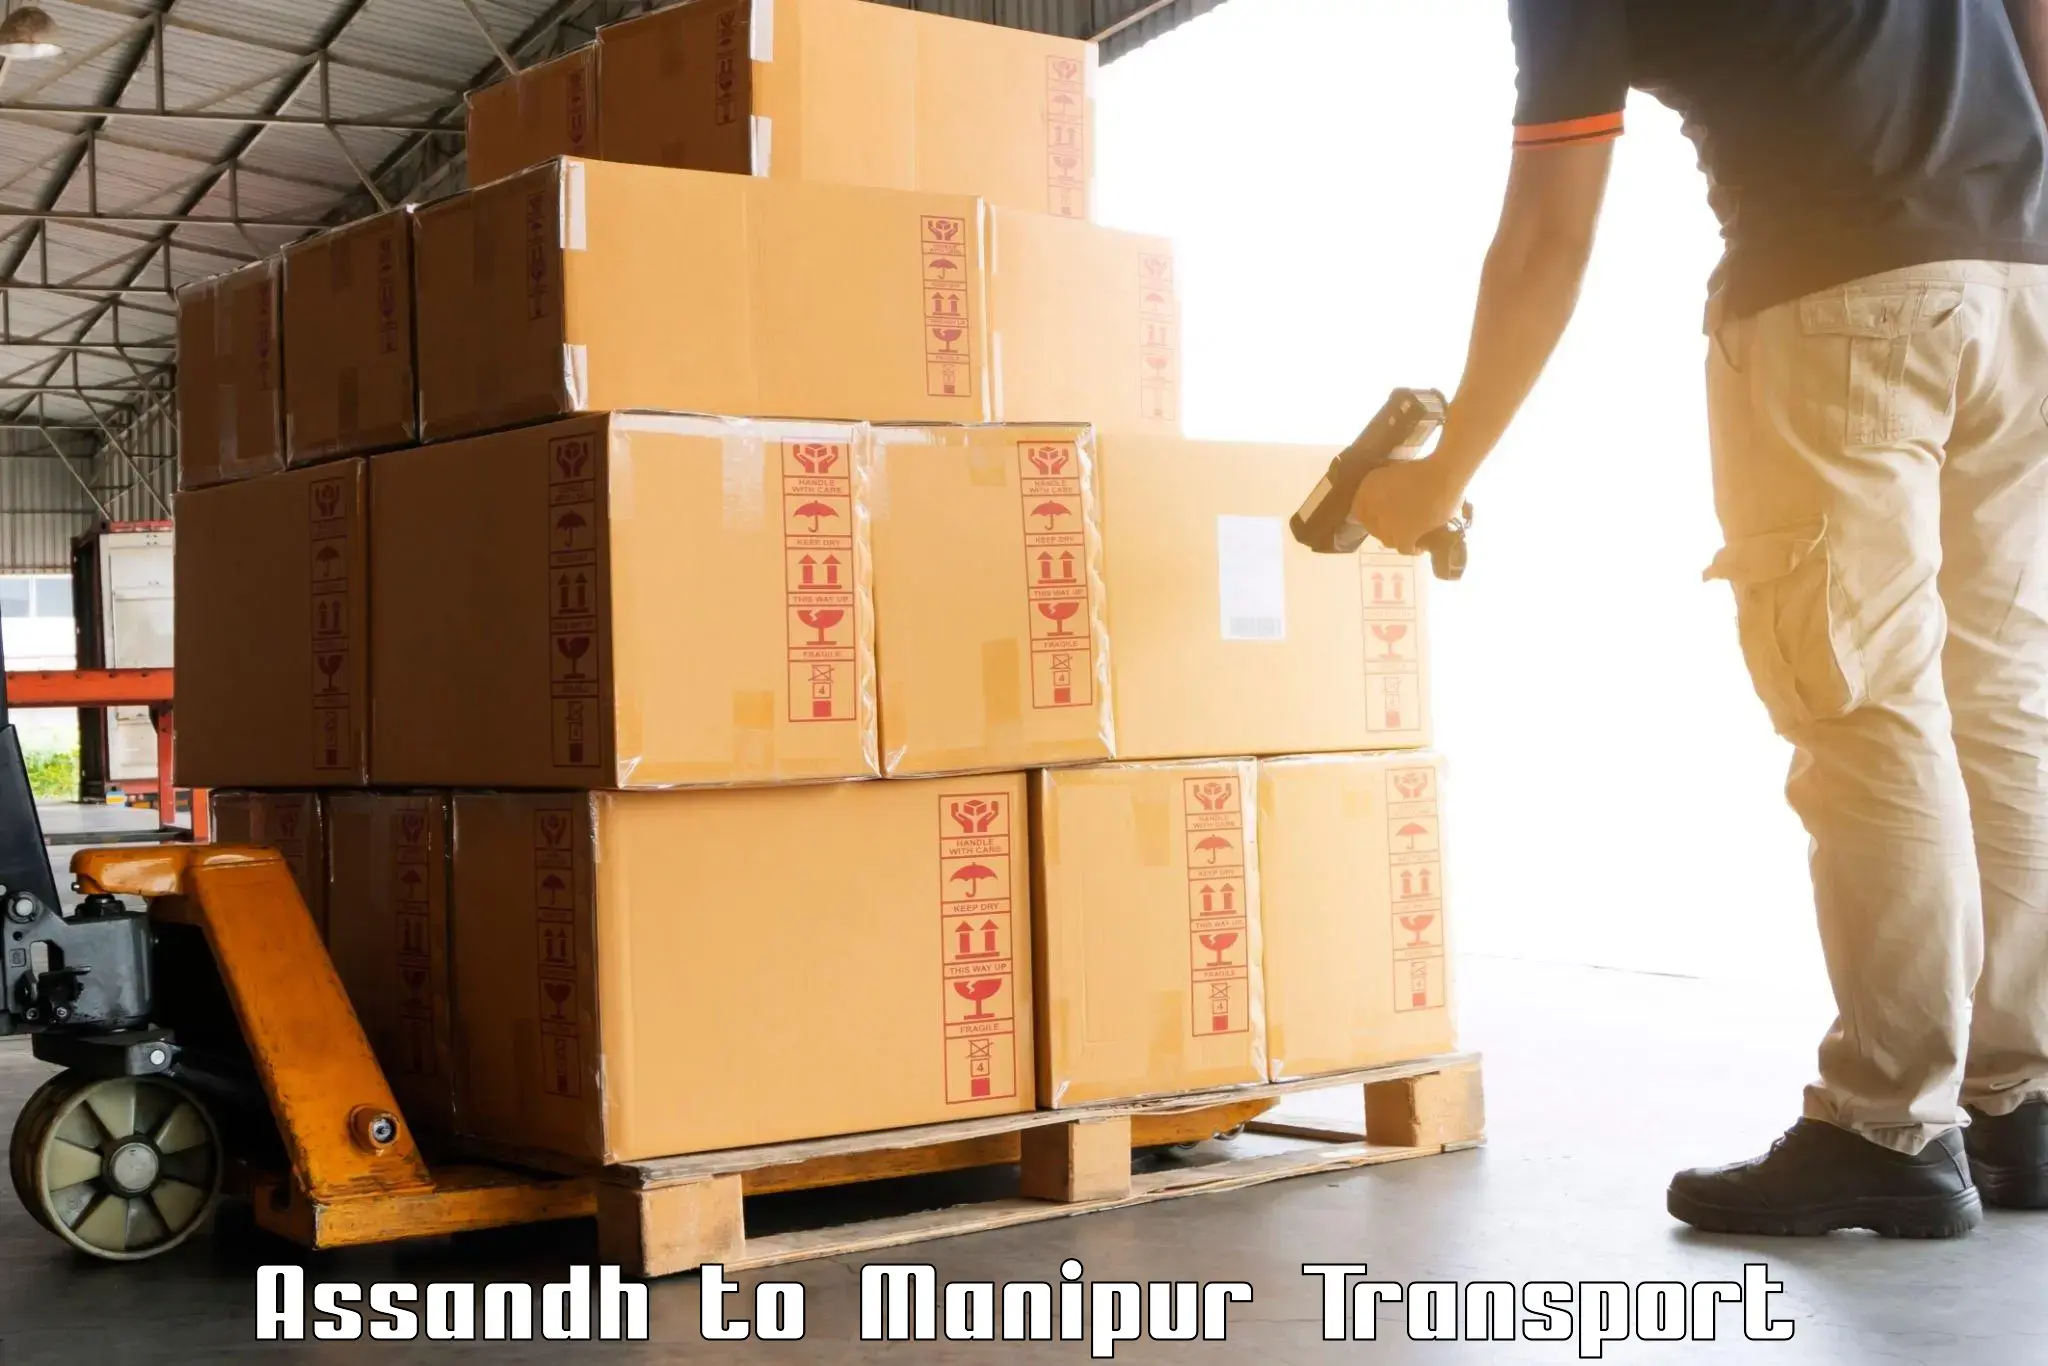 Daily parcel service transport Assandh to Manipur